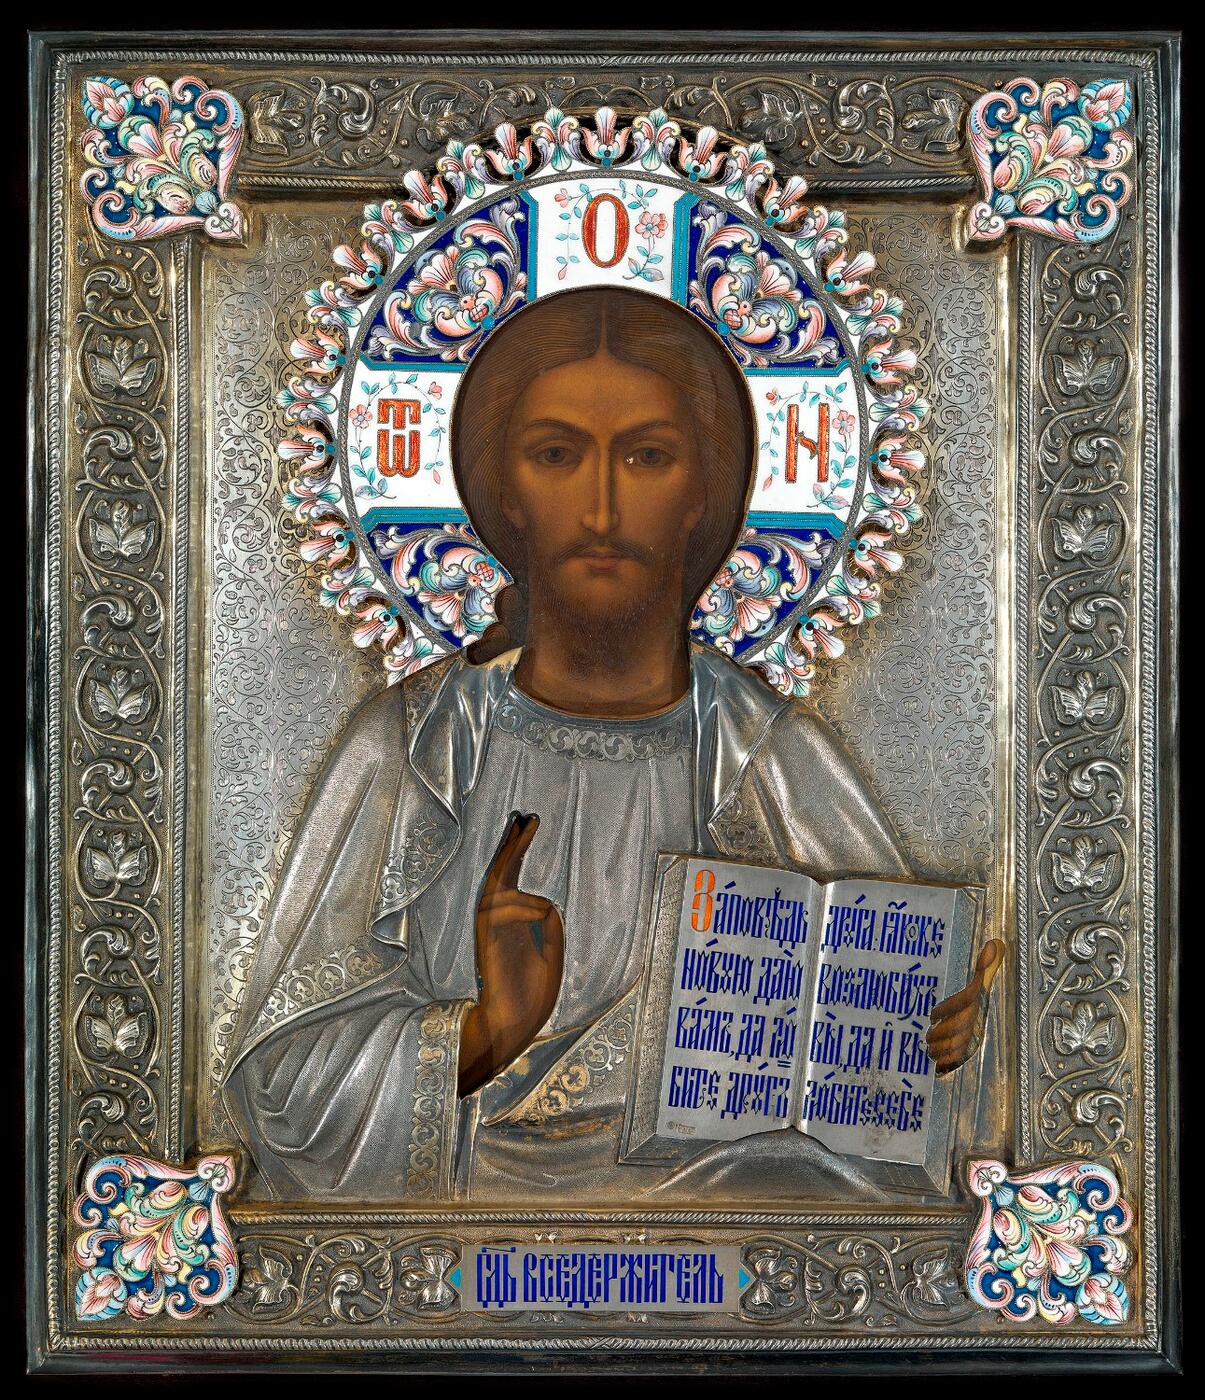 MIXED MEDIA ON PANEL, OKLAD STAMPED WITH MAKER'S MARK OF IVAN ALEXEEV IN CYRILLIC, MOSCOW, 1899–1908, 84 STANDARD